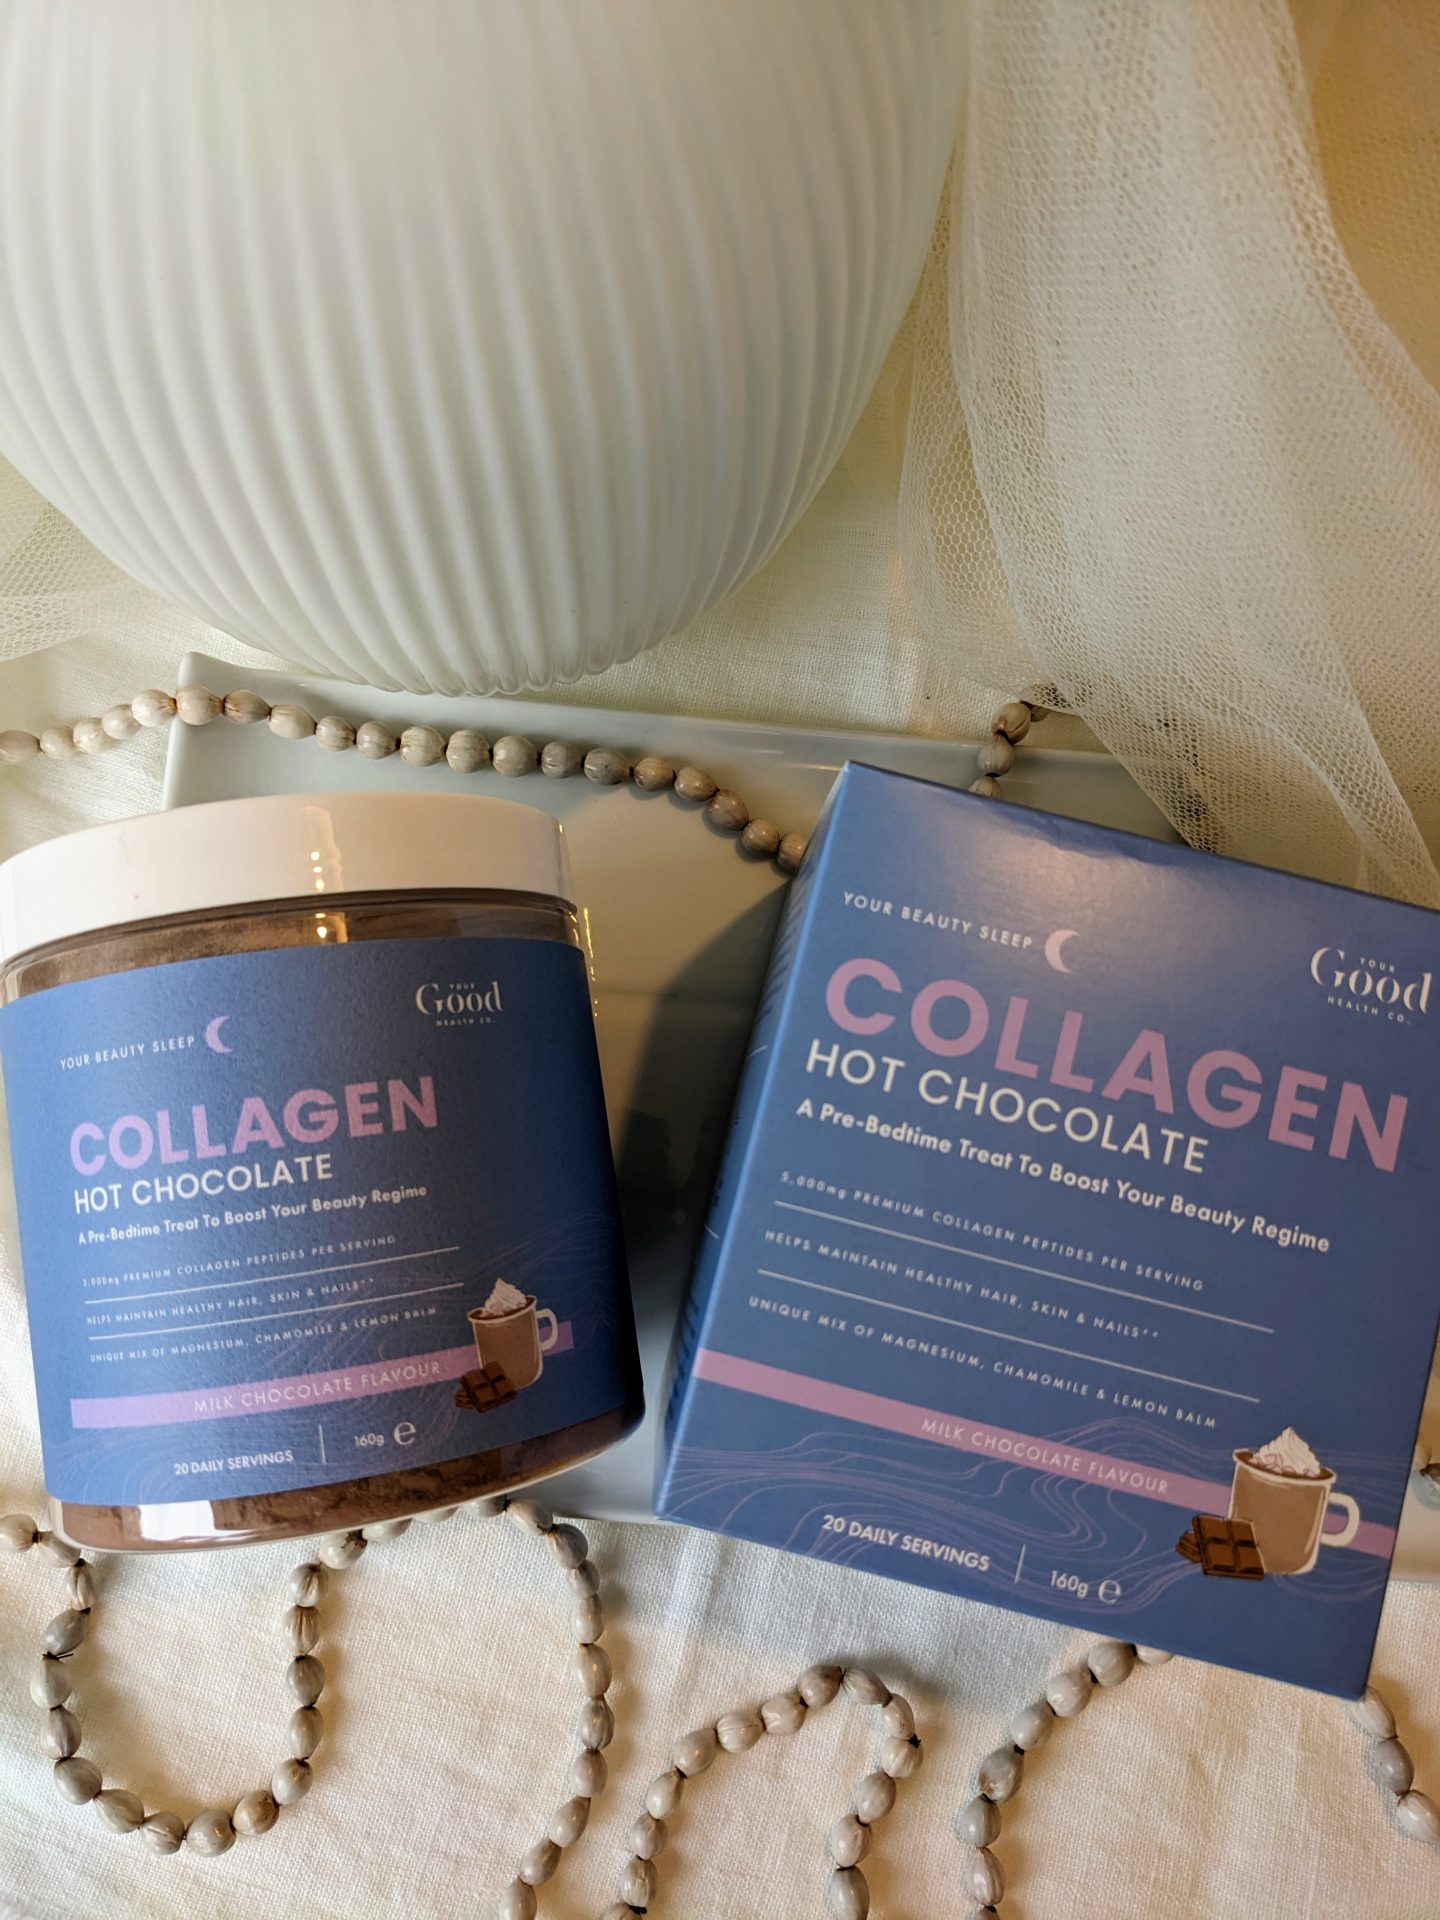 Collagen Hot Chocolate From Your Good Health Company